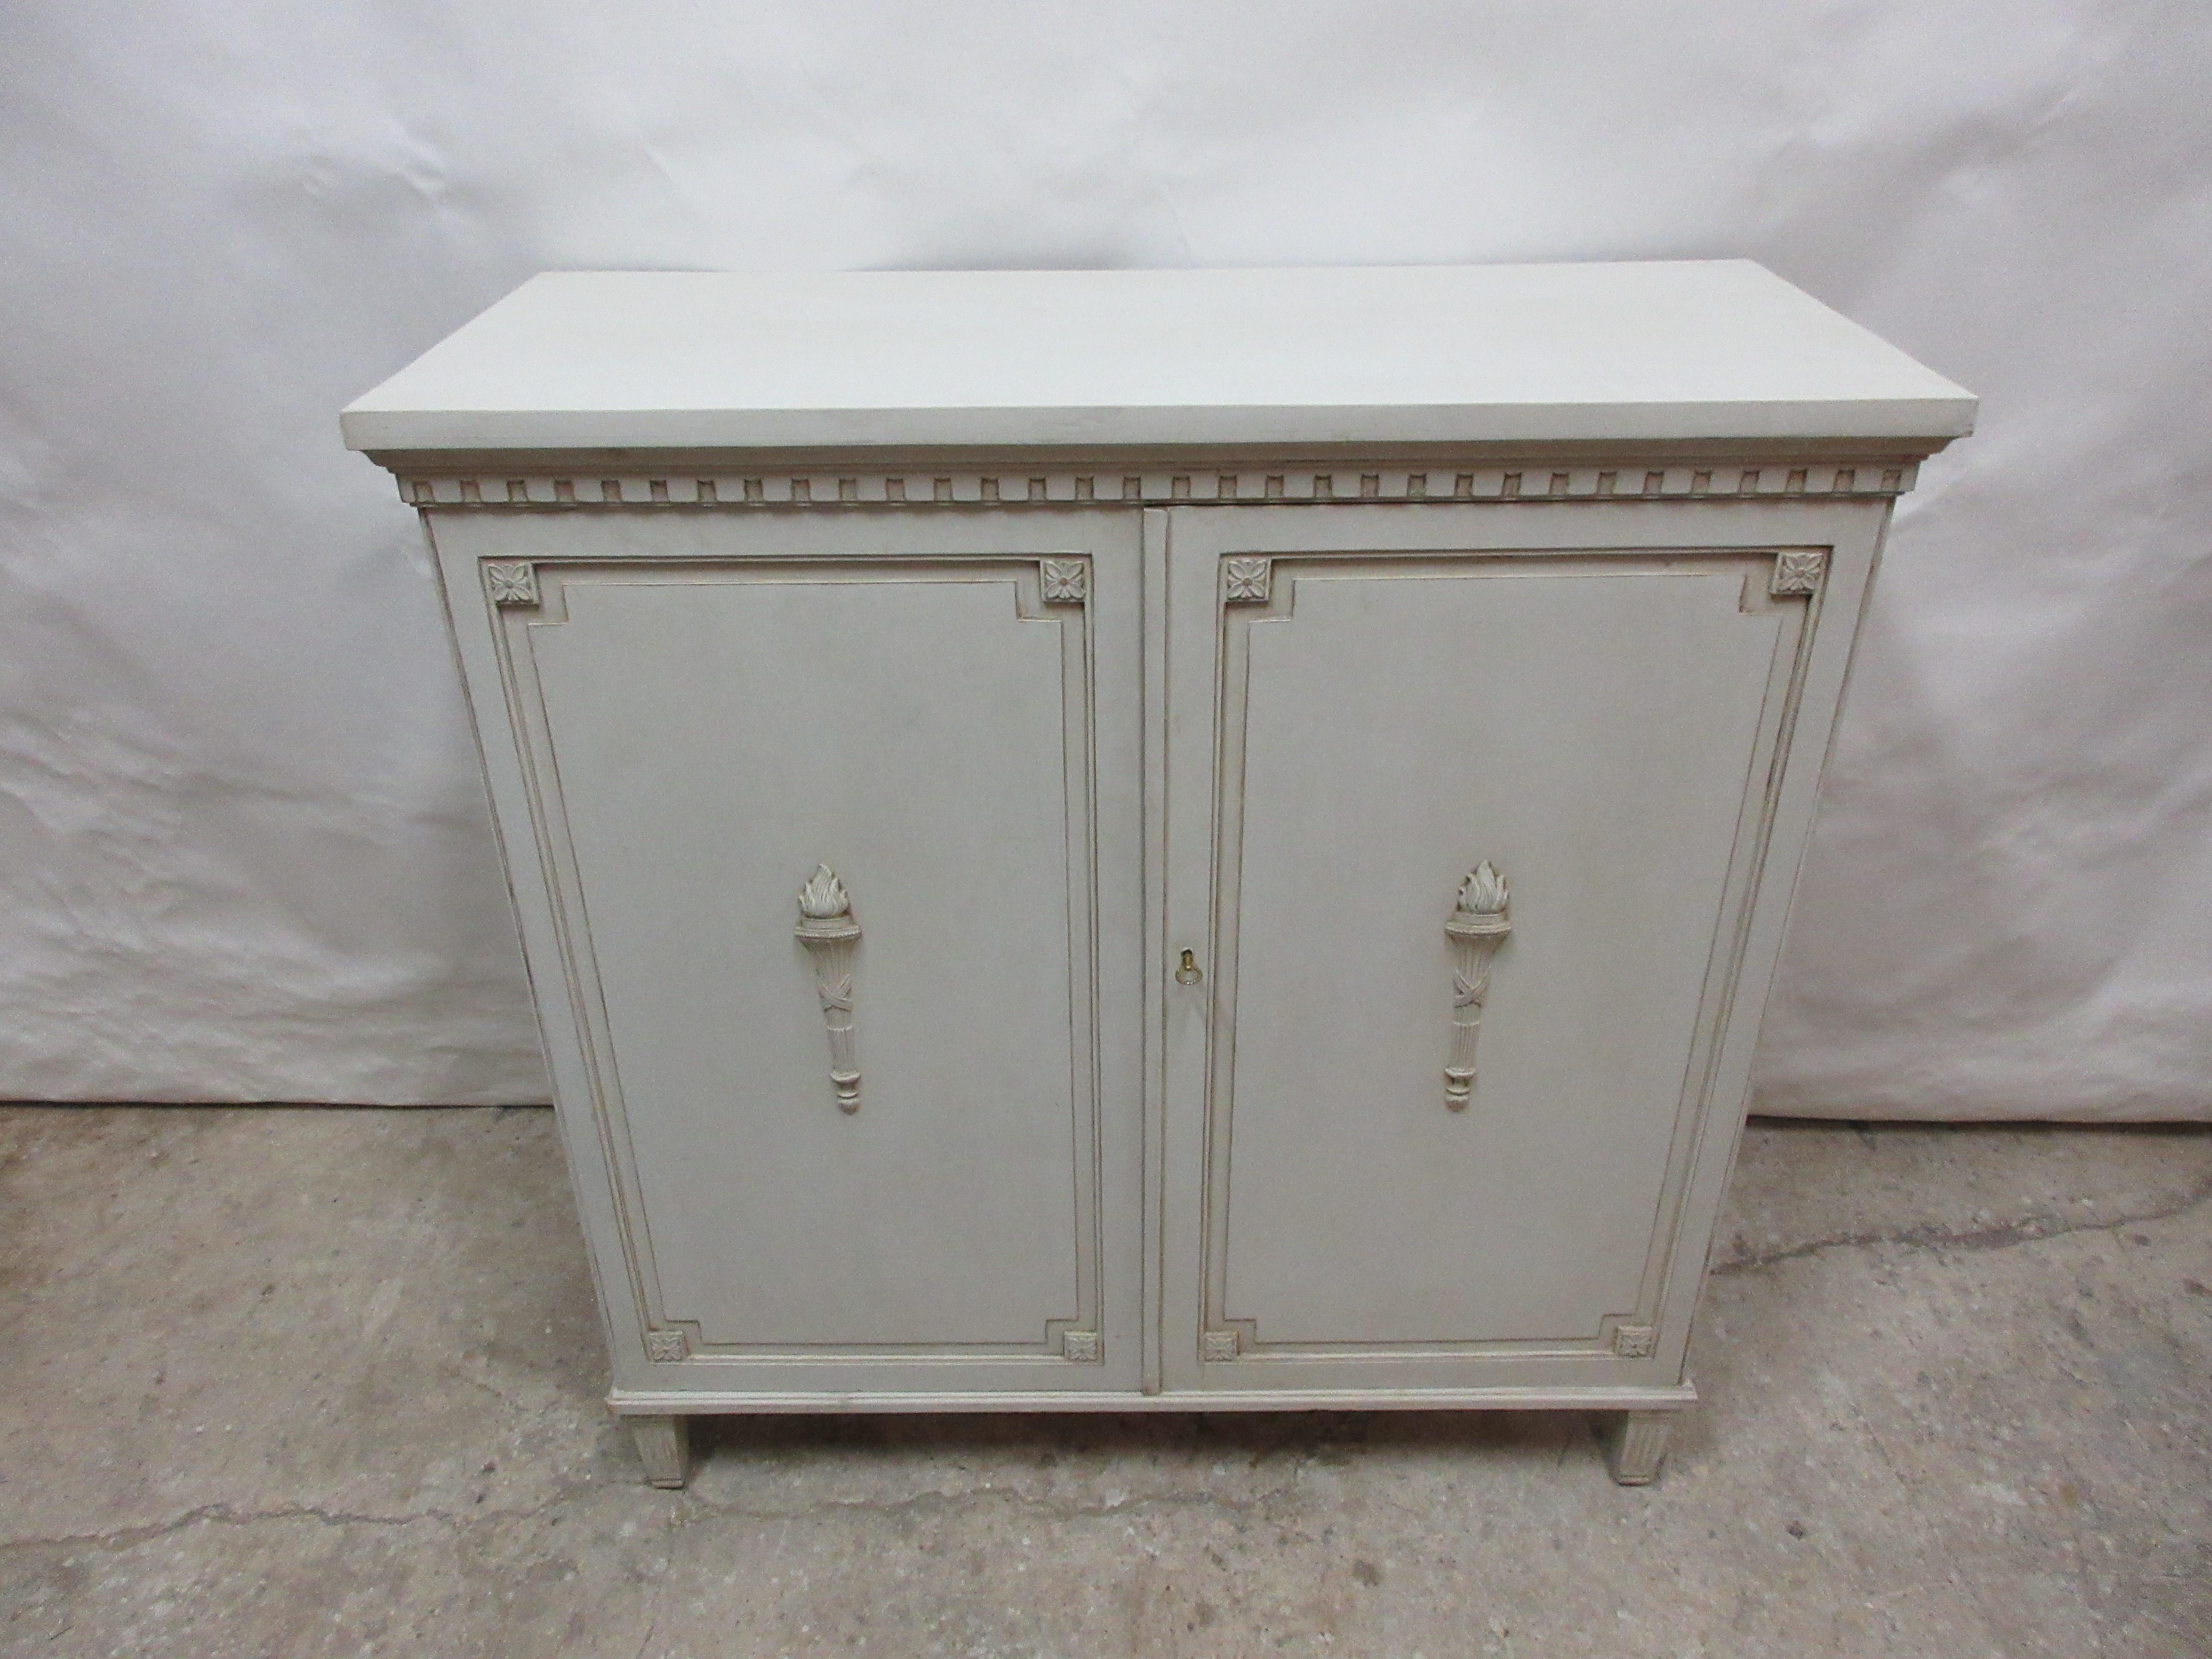 This is a very unique 2 door Gustavian style sideboard. It has been restored and repainted with Milk Paints 